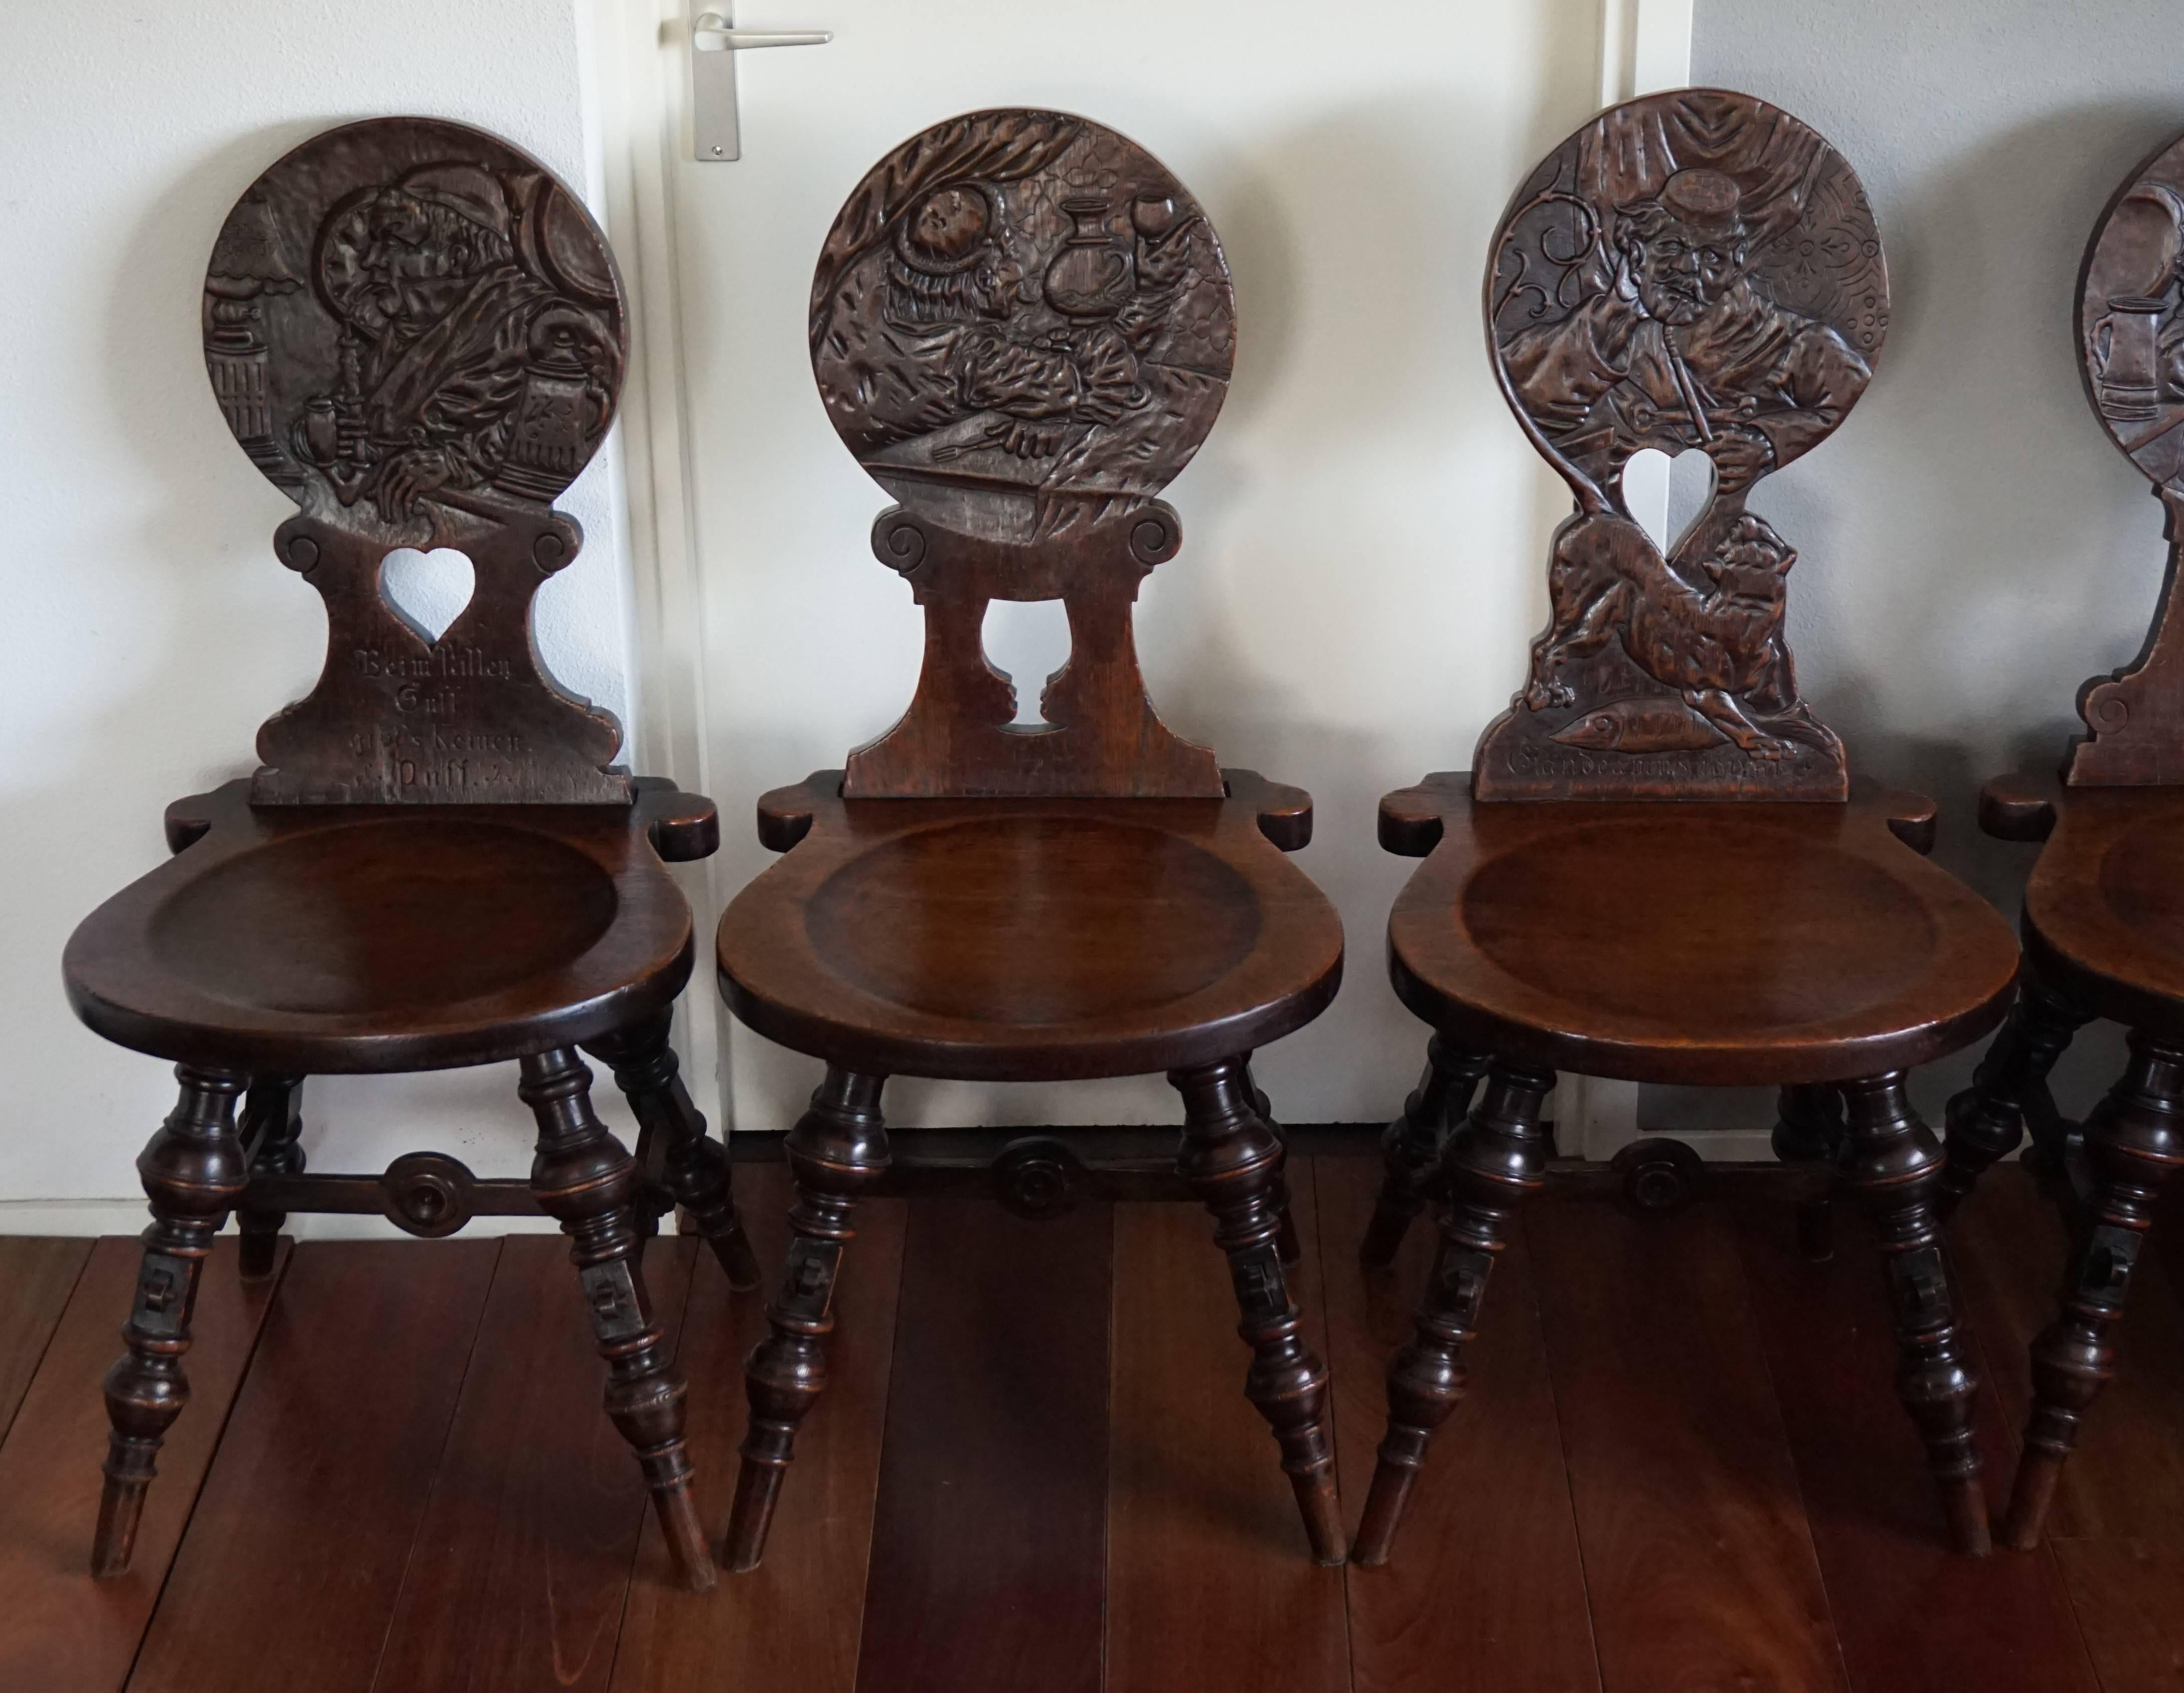 Unique set of six 19th century tavern chairs.

These extremely rare chairs should go to a museum, but if they go to a private buyer who appreciates and takes good care of them, that will be fine too. Over the years we have seen very few tavern